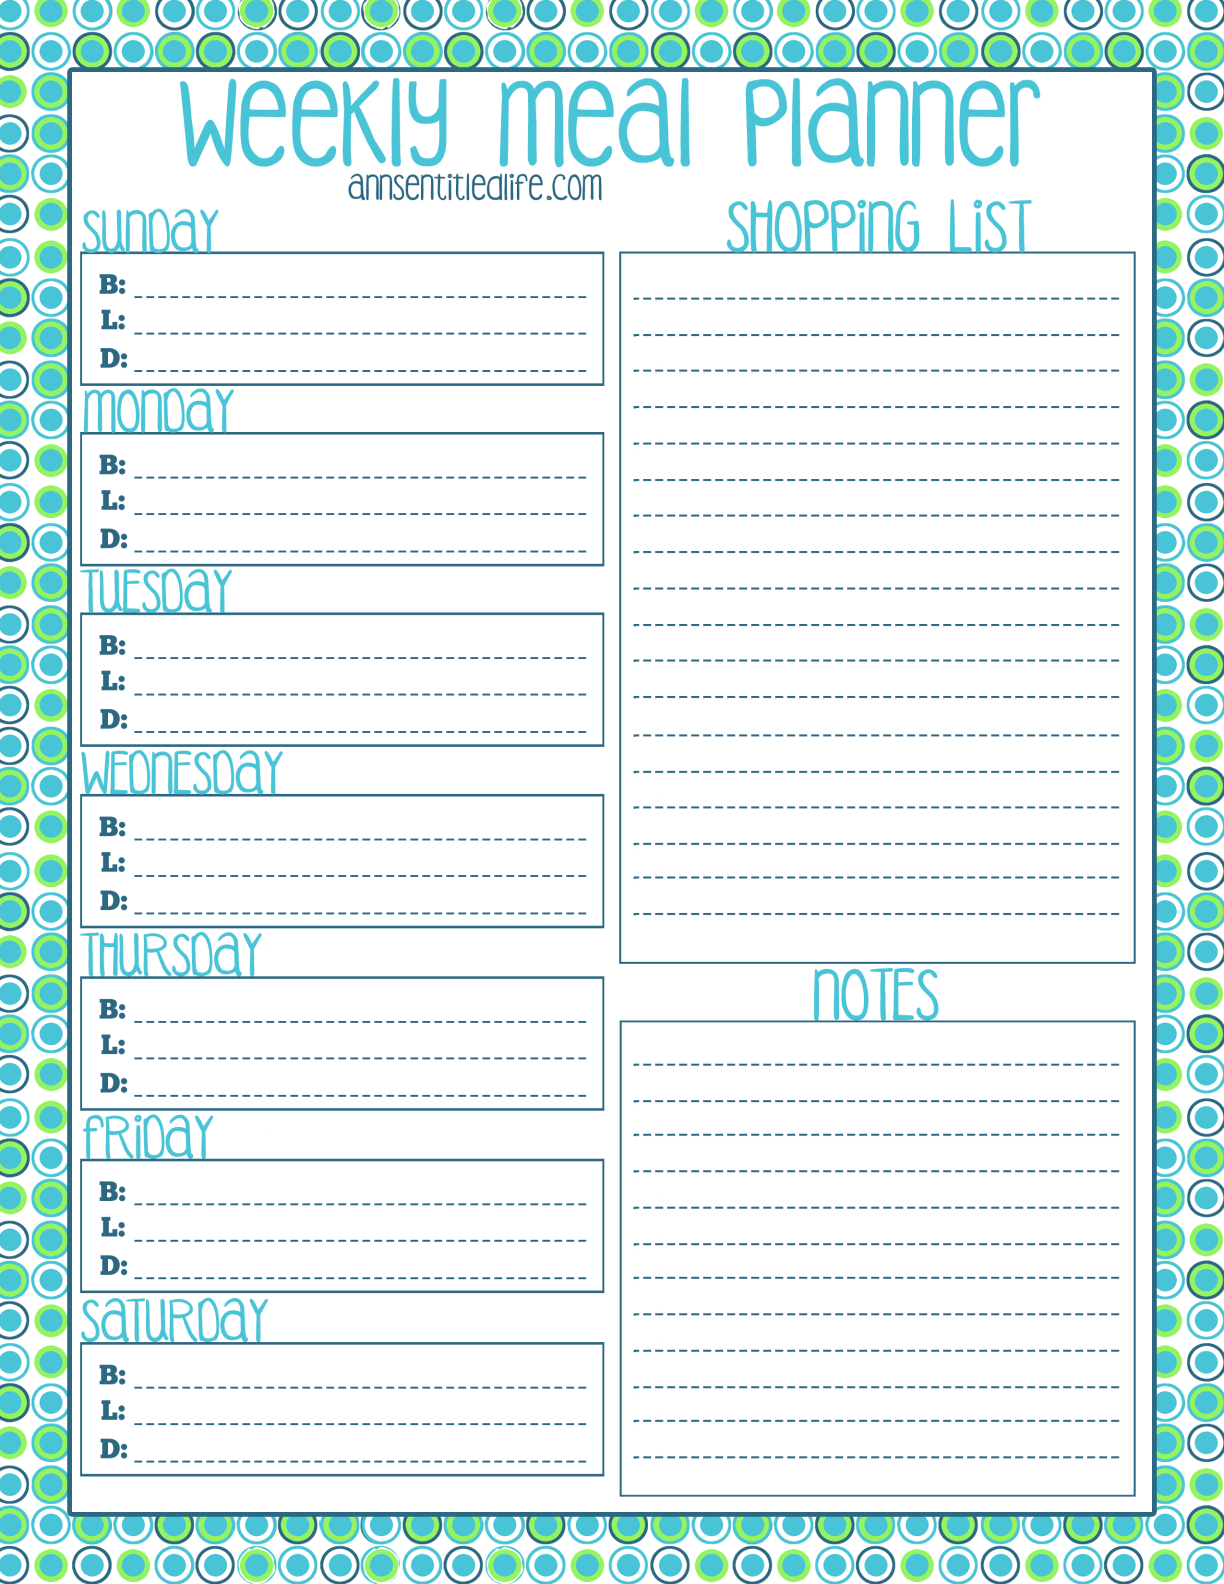 Free Printable Recipe Card, Meal Planner And Kitchen Labels - Free Printable Meal Planner